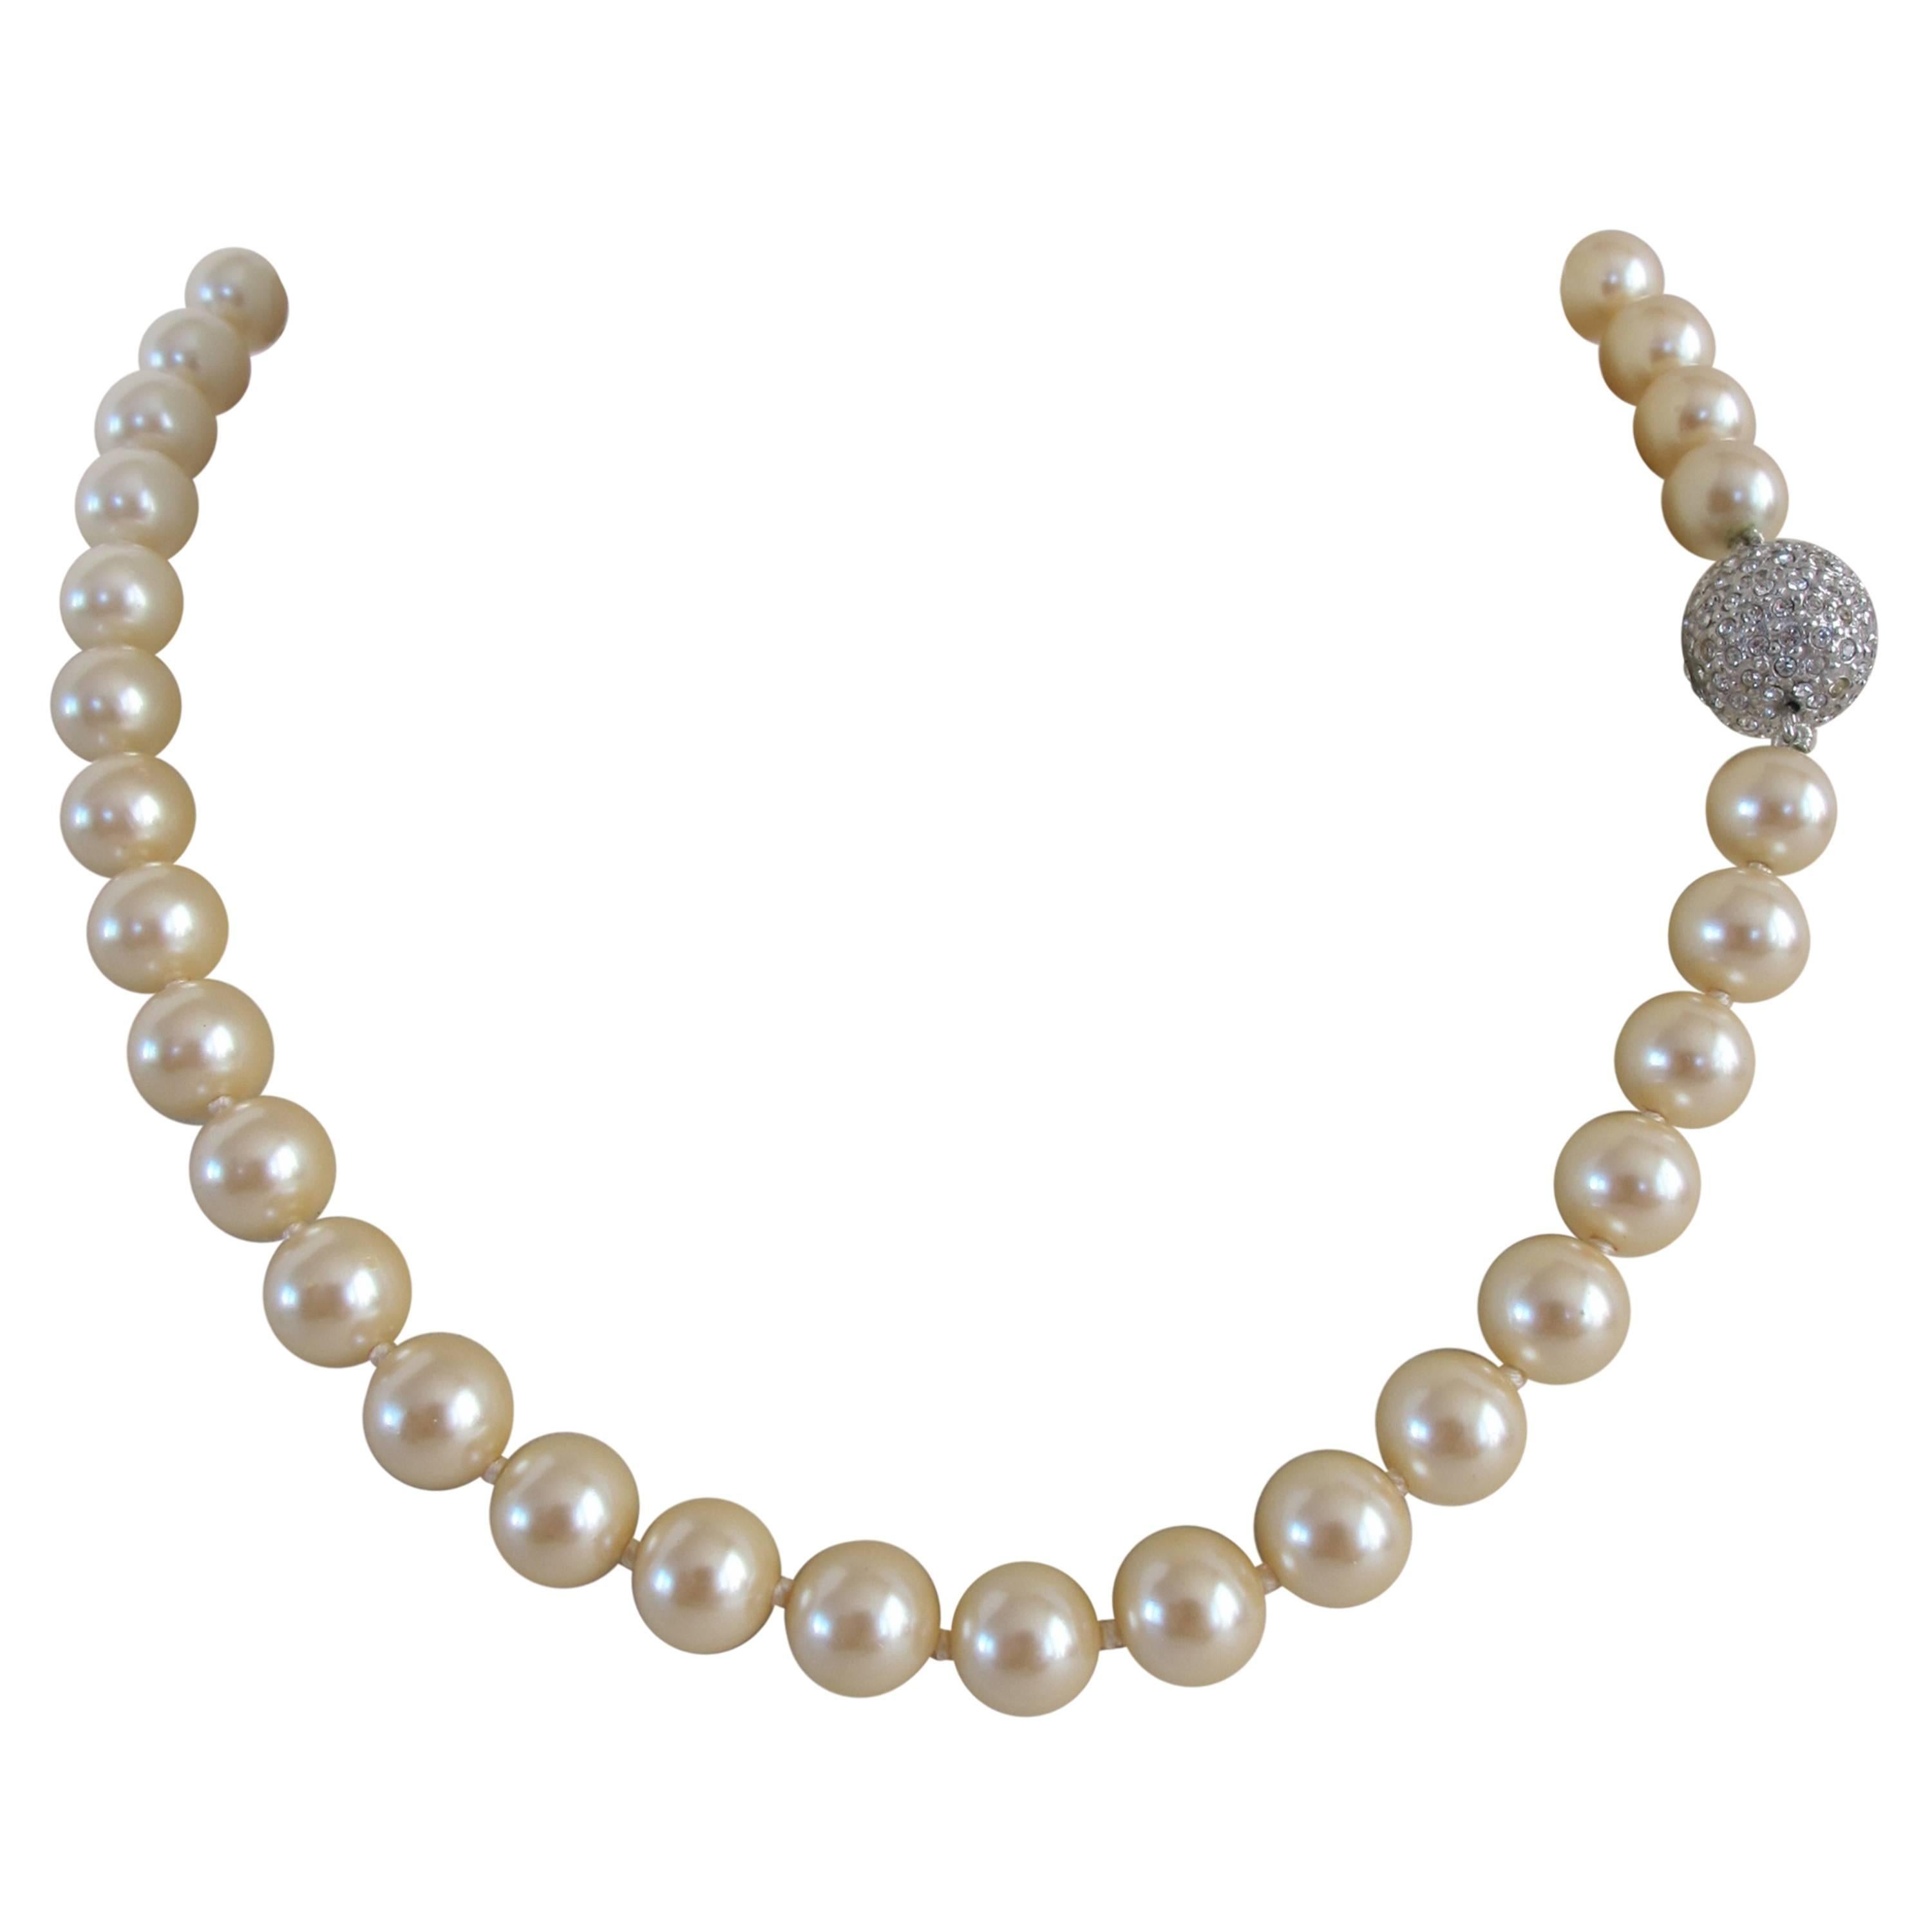 Knotted 1960's 1.5 cm Pearl Necklace with Rhinestone Disco Ball Closure For Sale